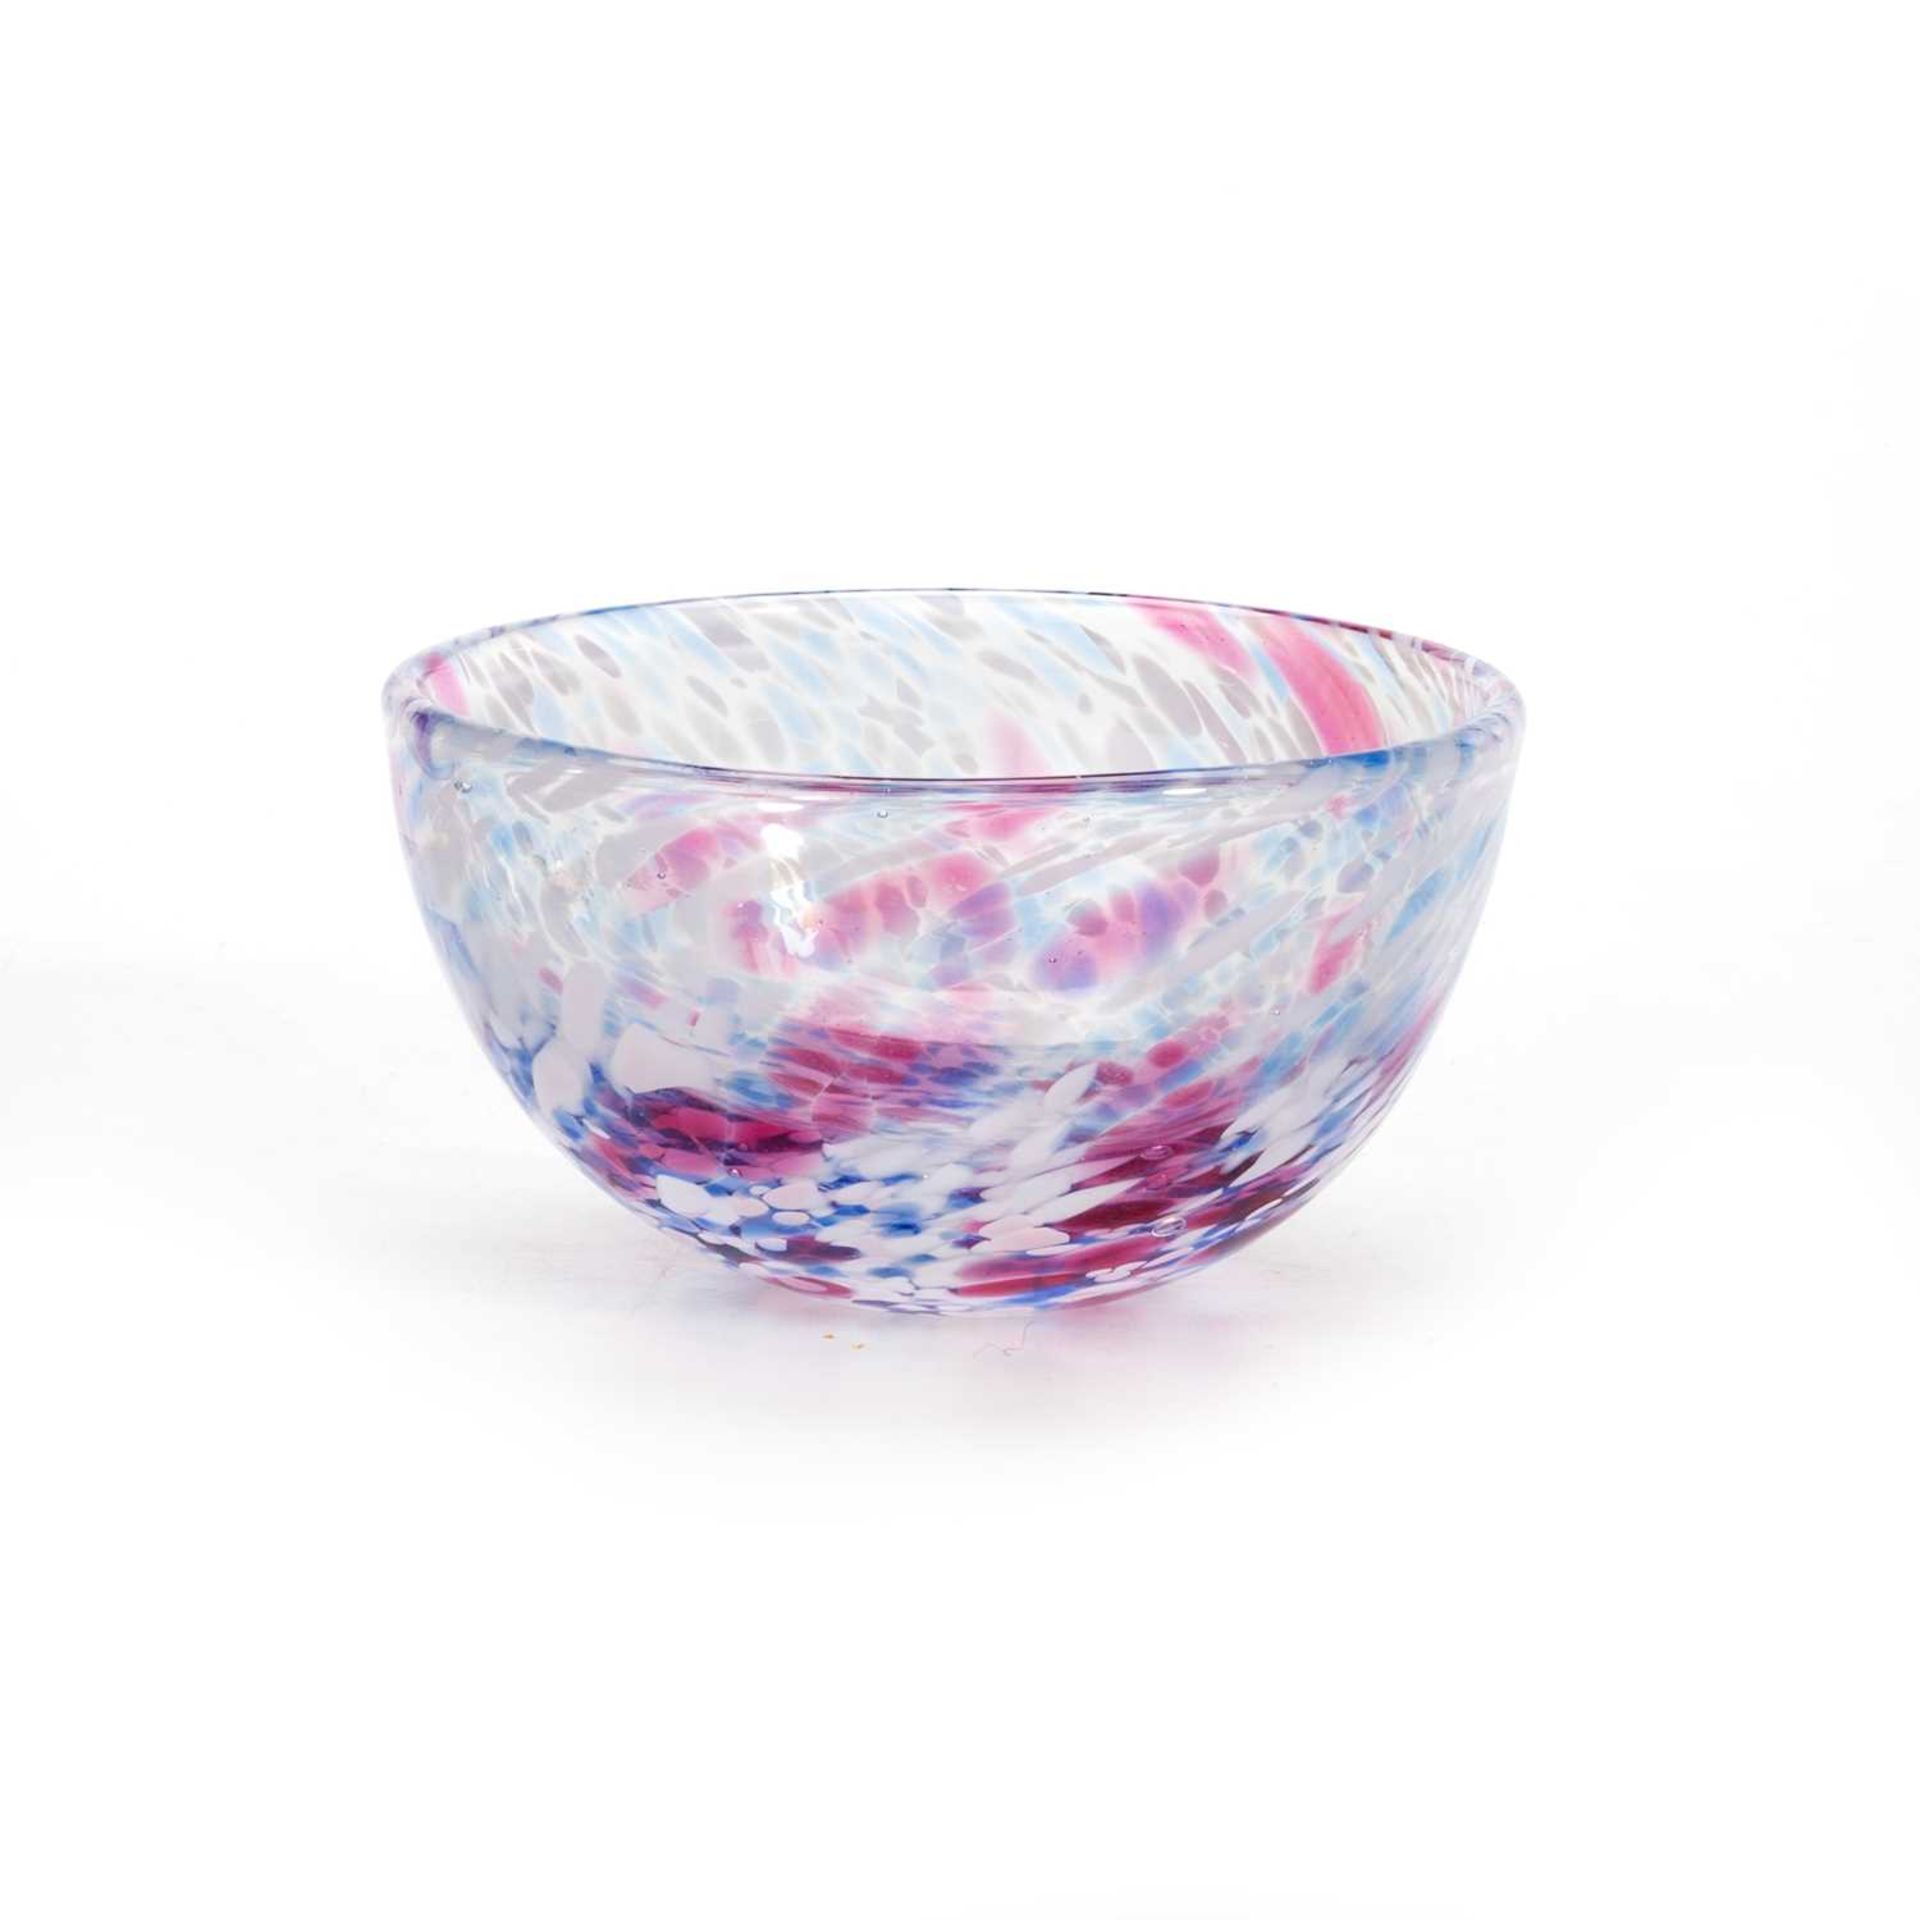 TWO JANE CHARLES STUDIO GLASS 'URCHIN' BOWLS AND A VASE - Image 5 of 5